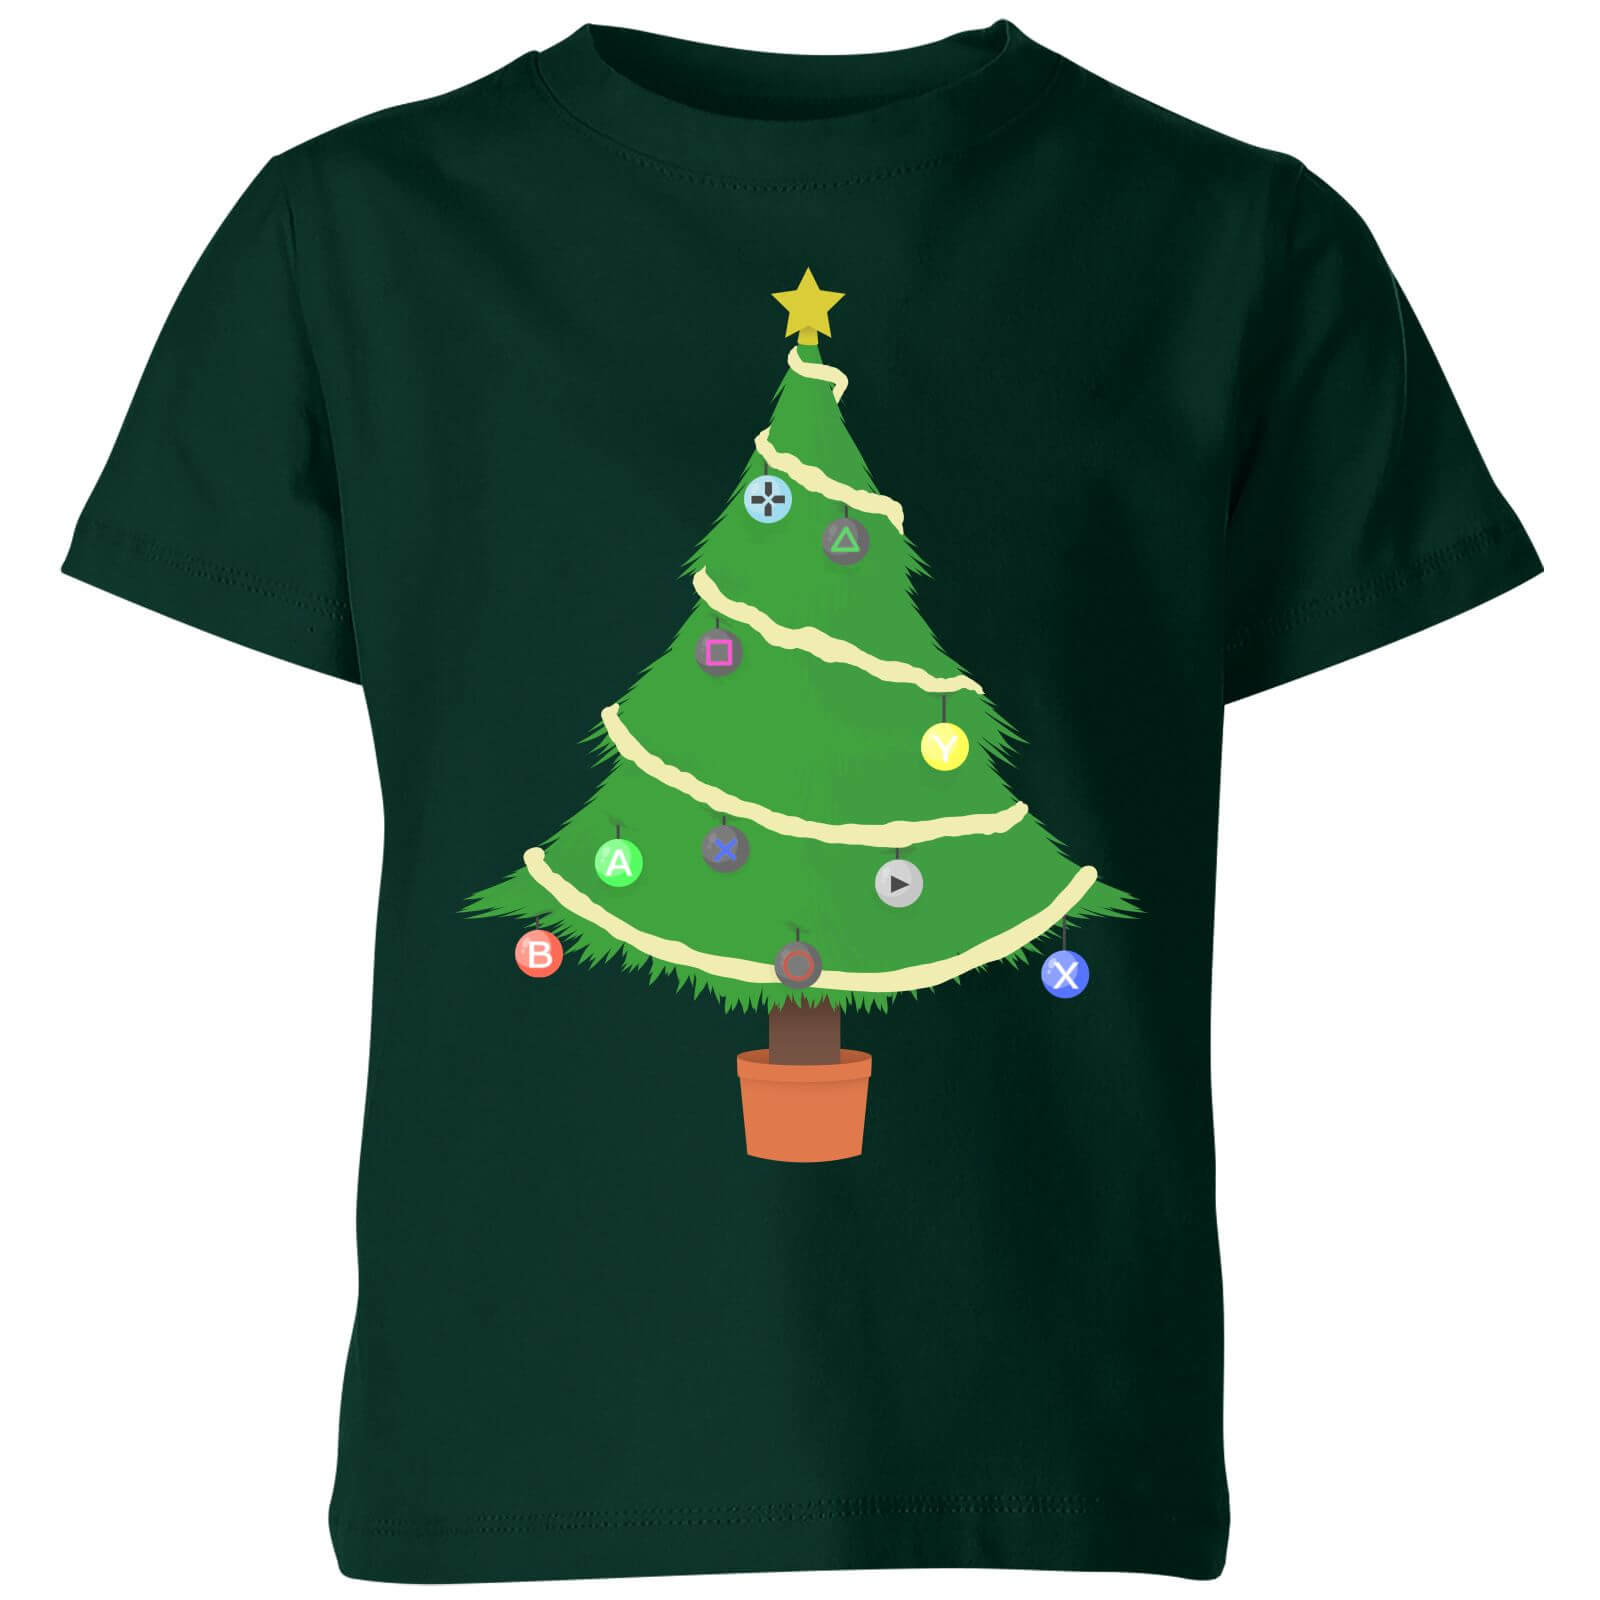 Buttons Tree Kids' T-Shirt - Forest Green - 3-4 Years - Forest Green